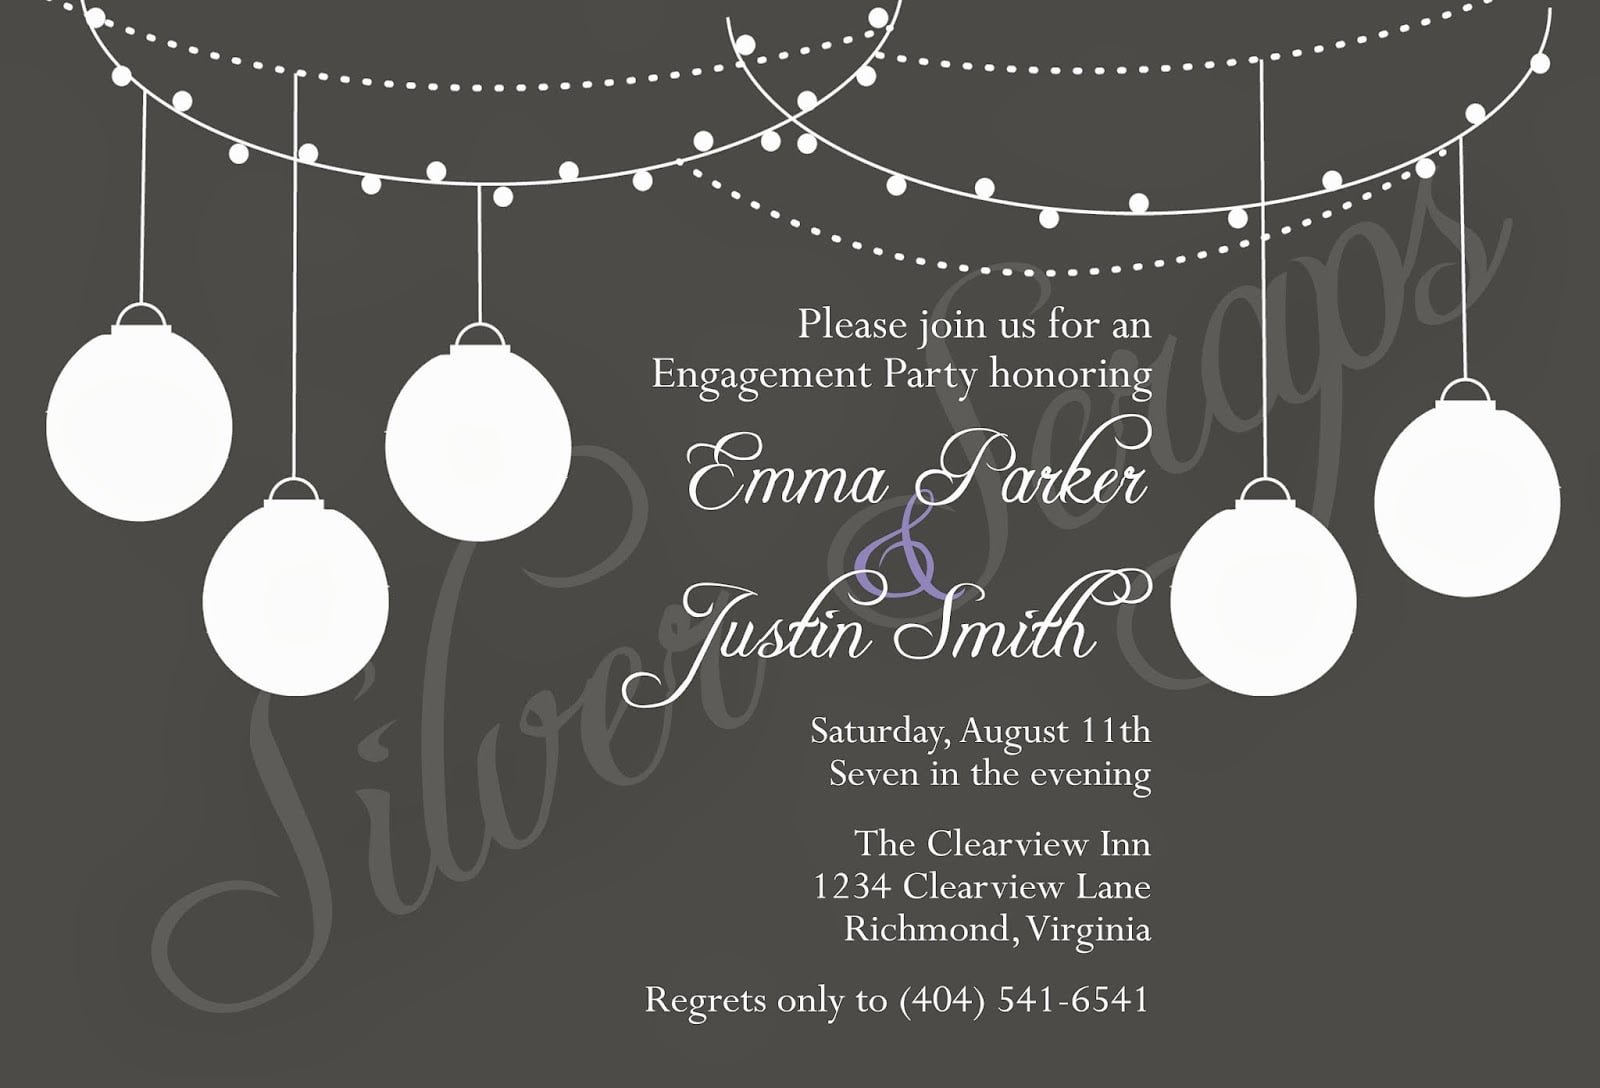 White Party Invitations White Party Invitations And Pretty Party